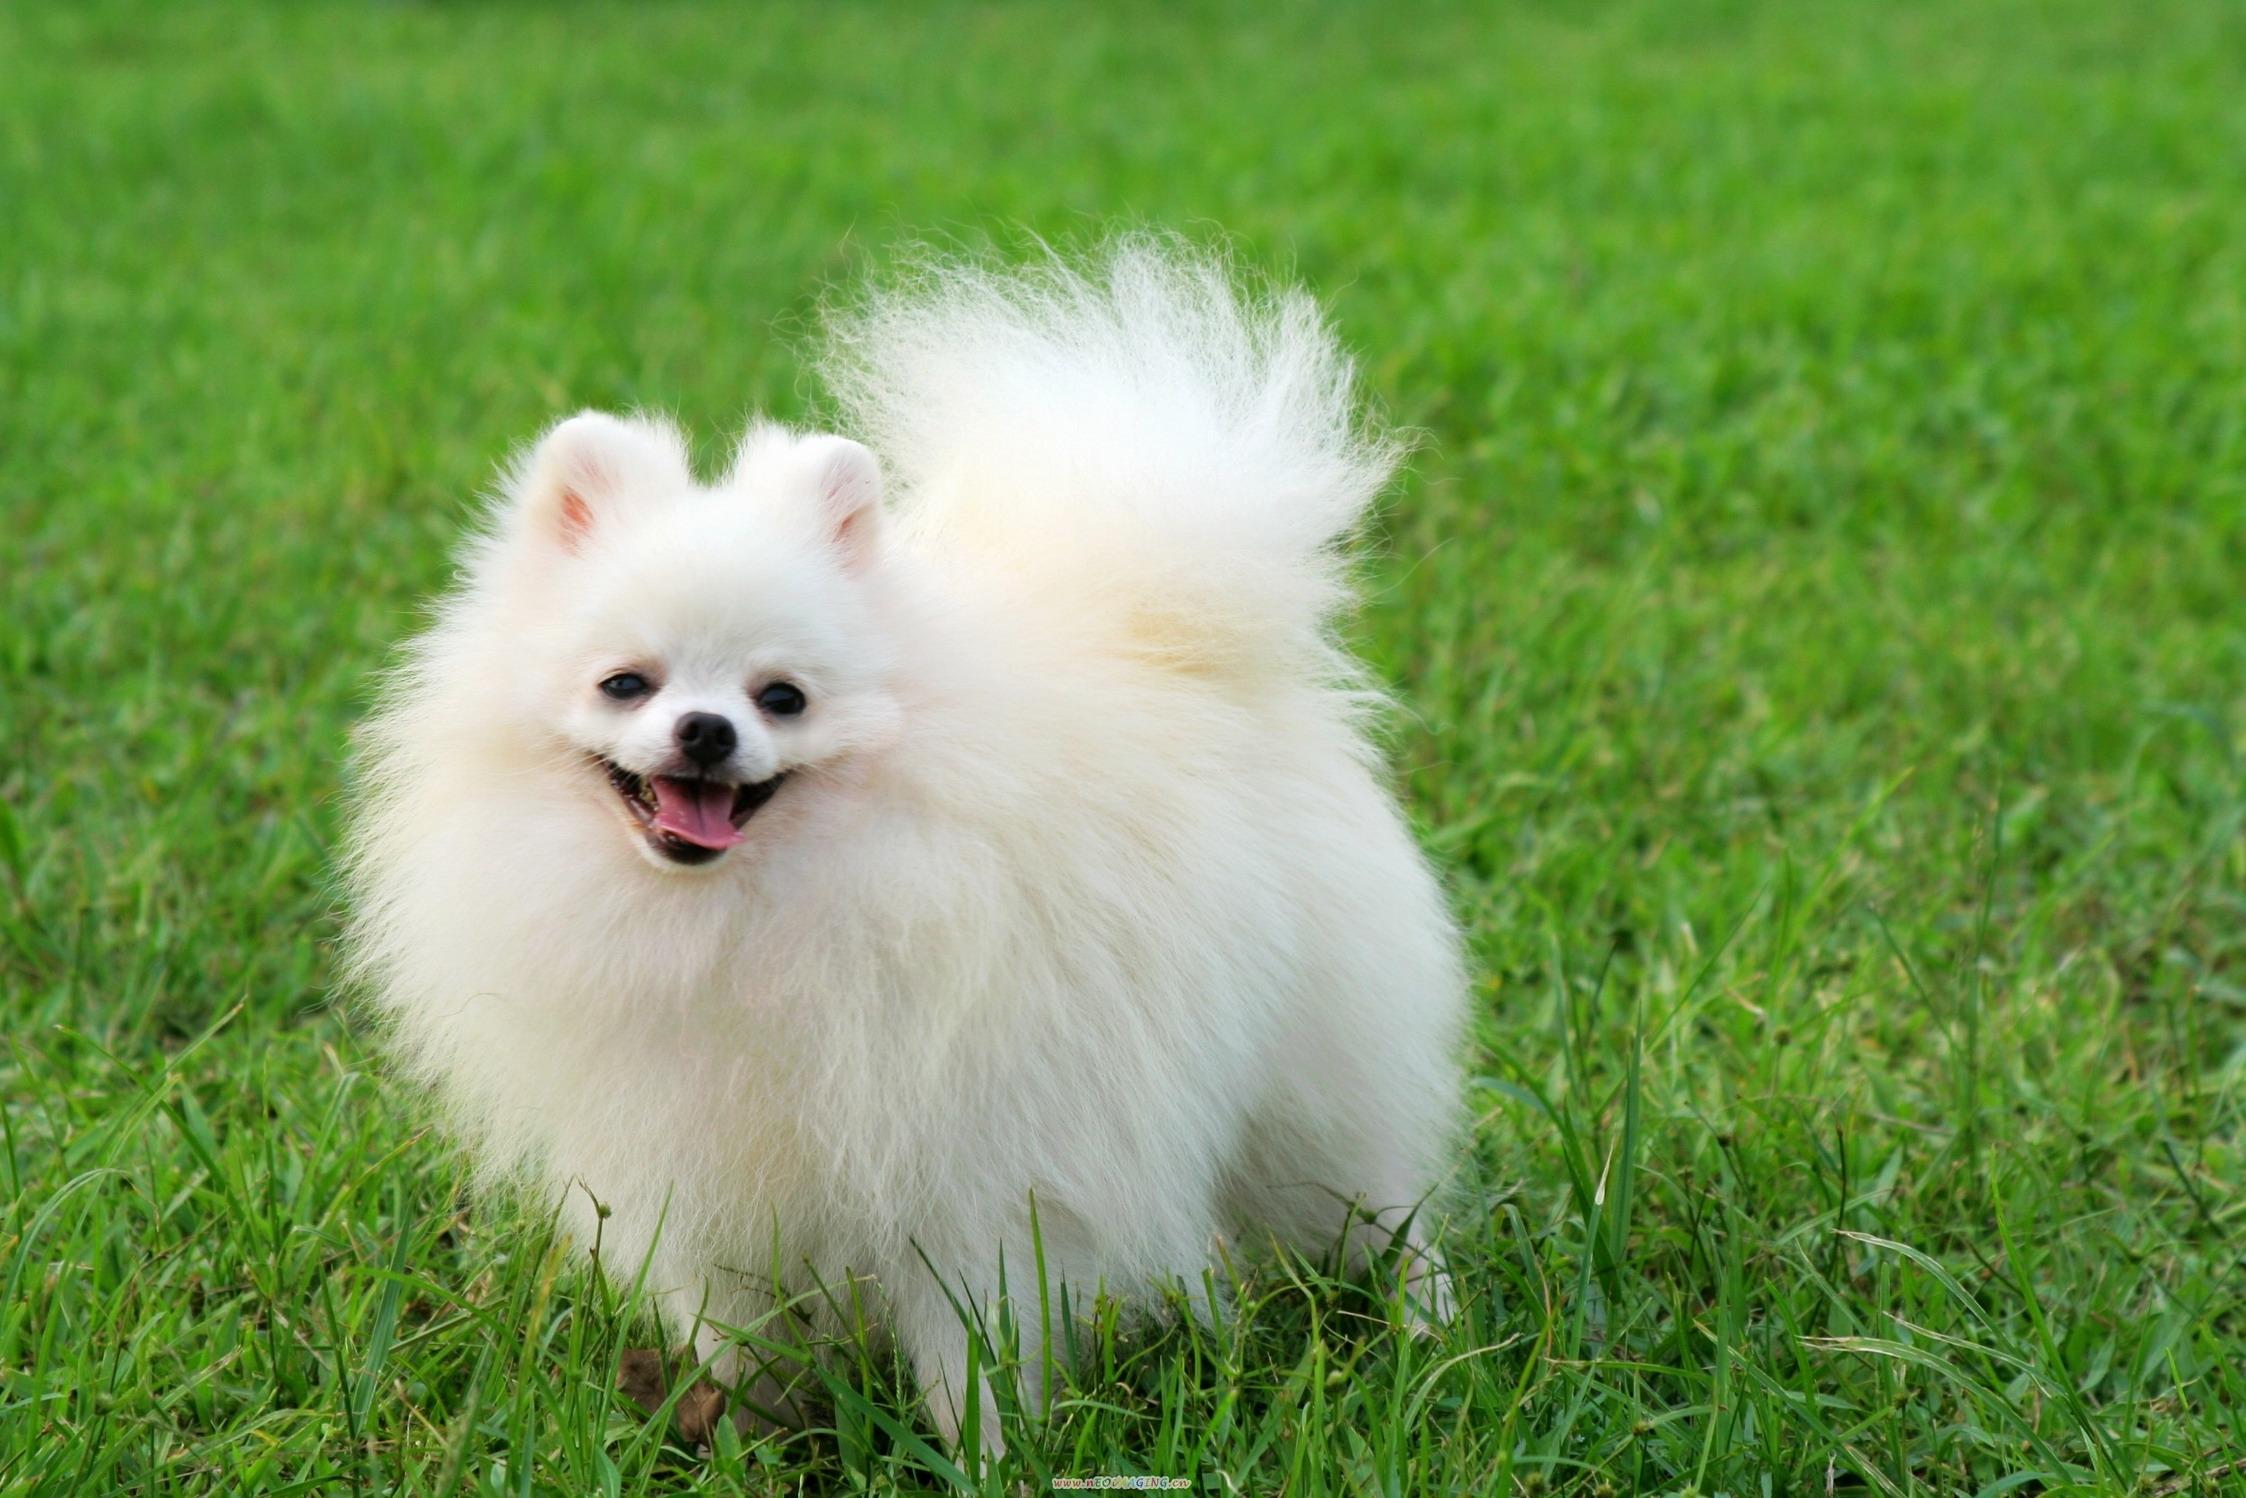 Pomeranian Puppies Wallpaper Android Apps on Google Play 2246x1498